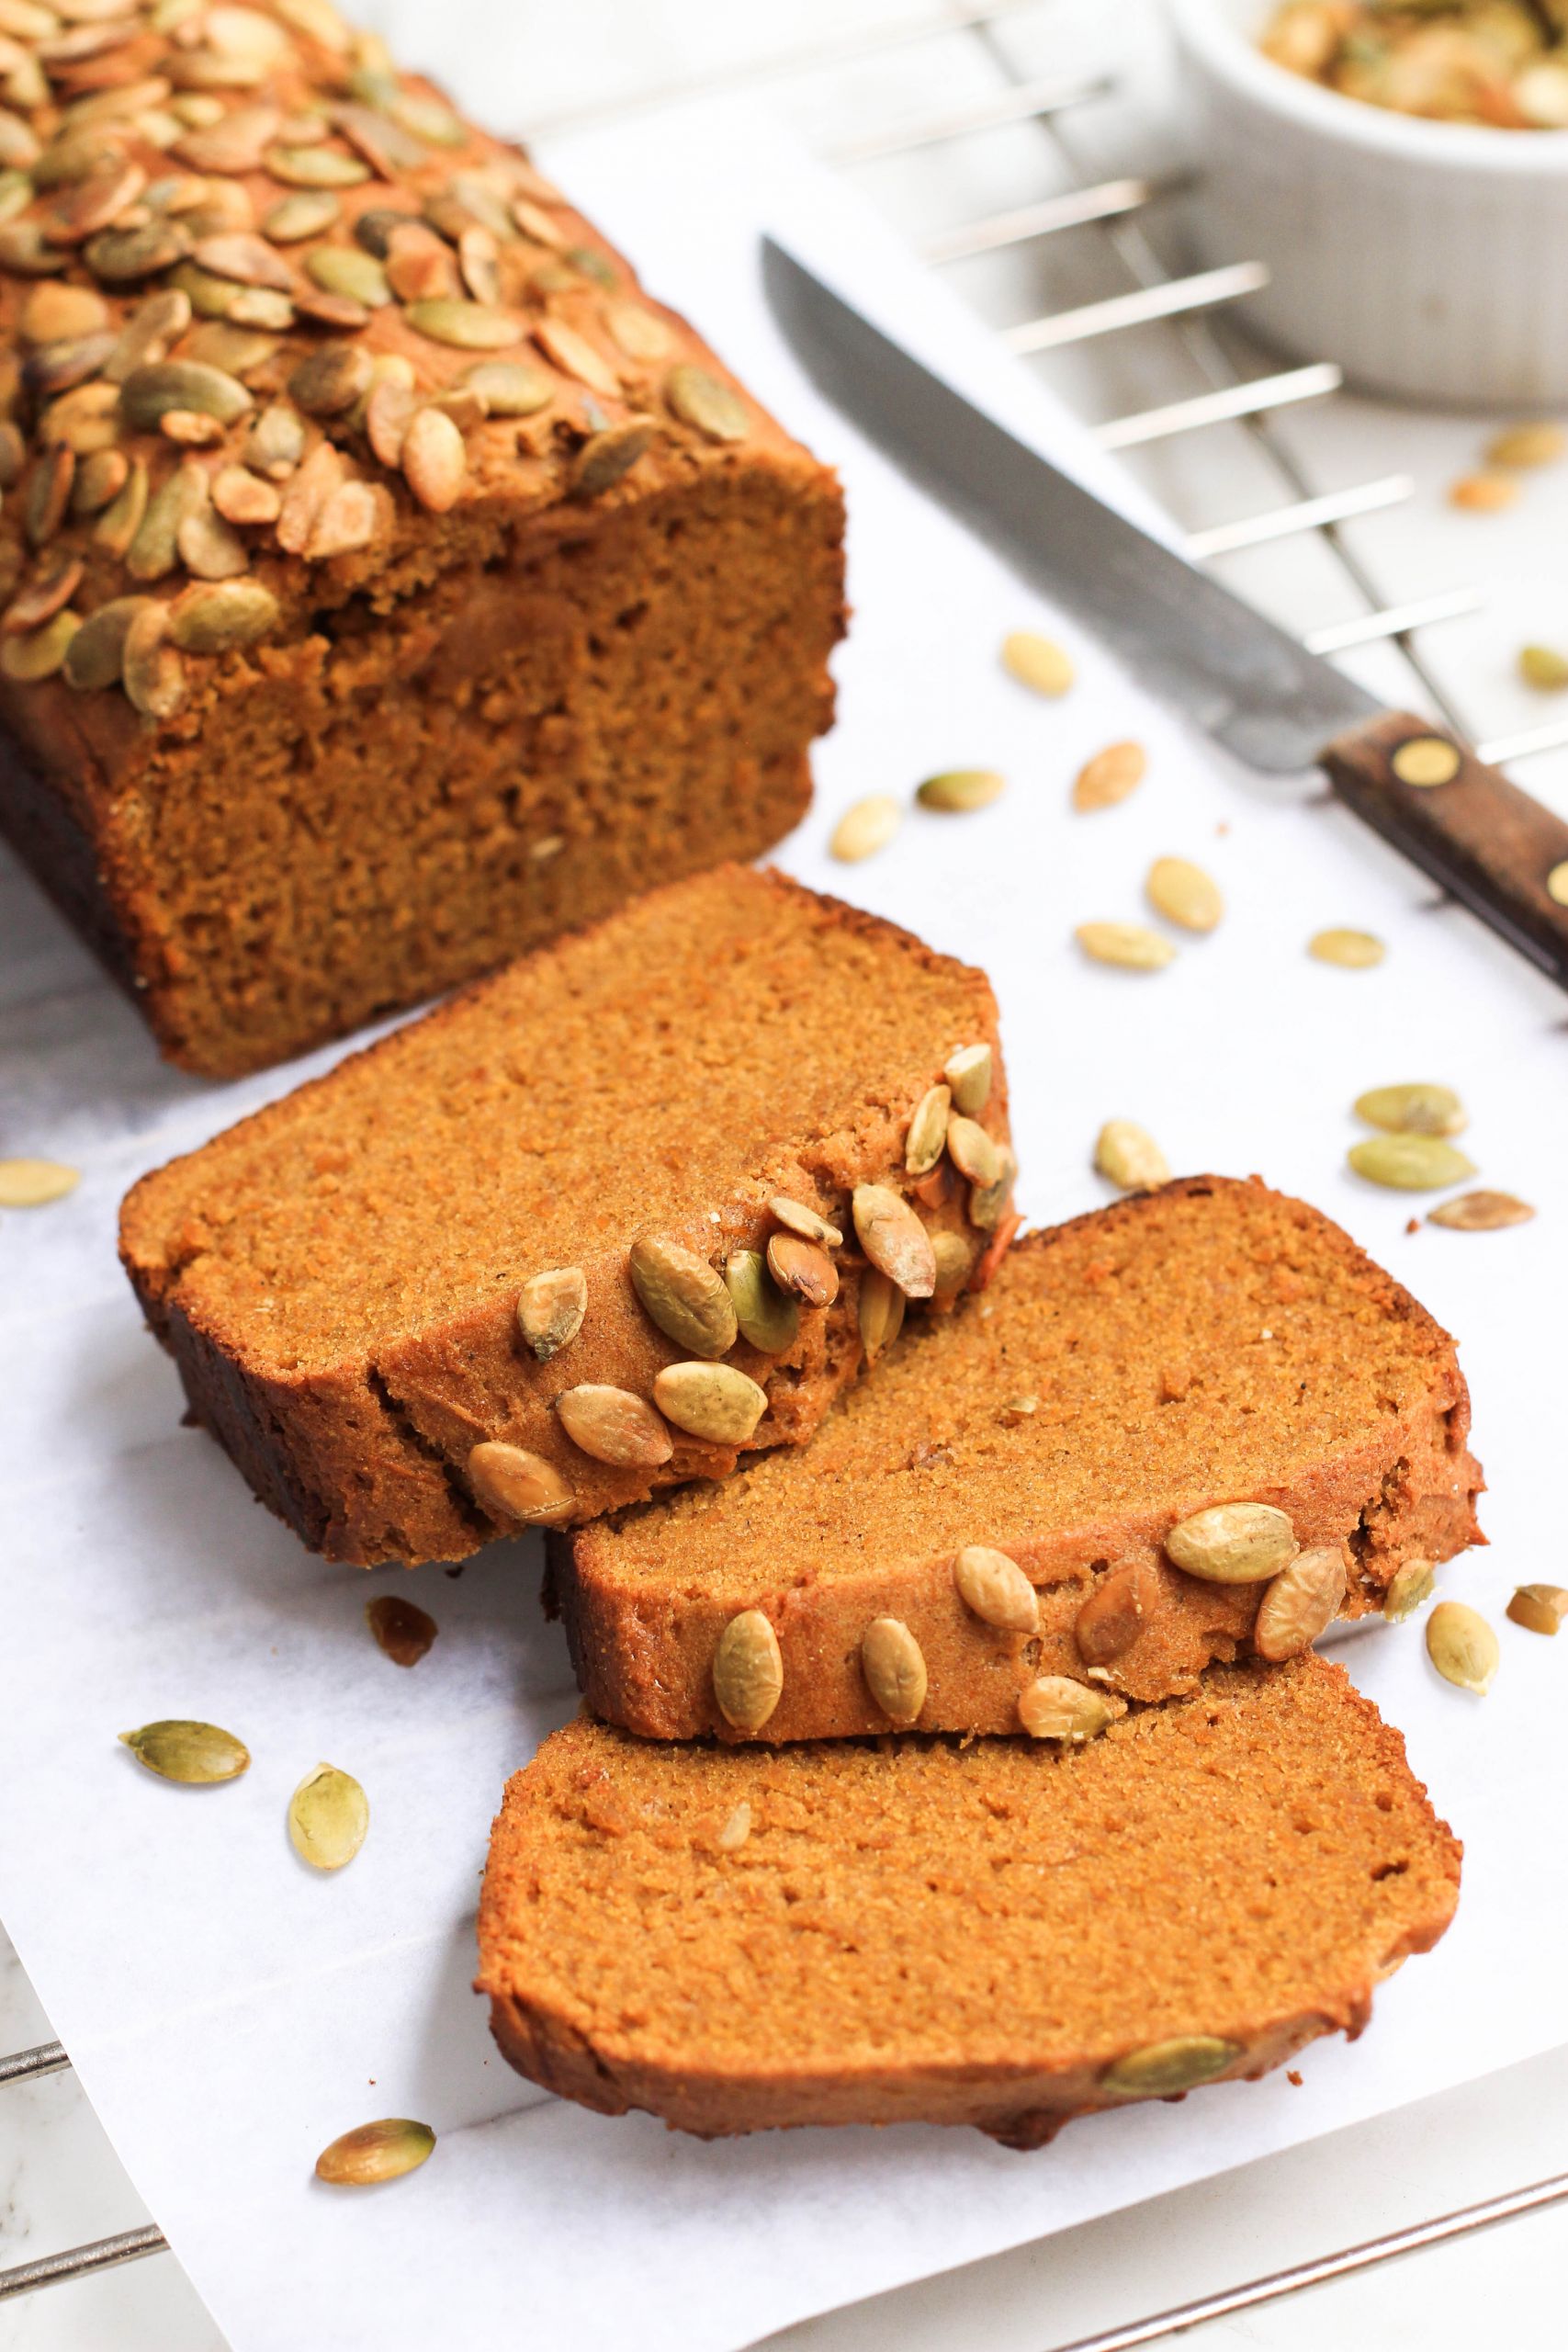 Our Most Shared Dairy Free Pumpkin Bread
 Ever